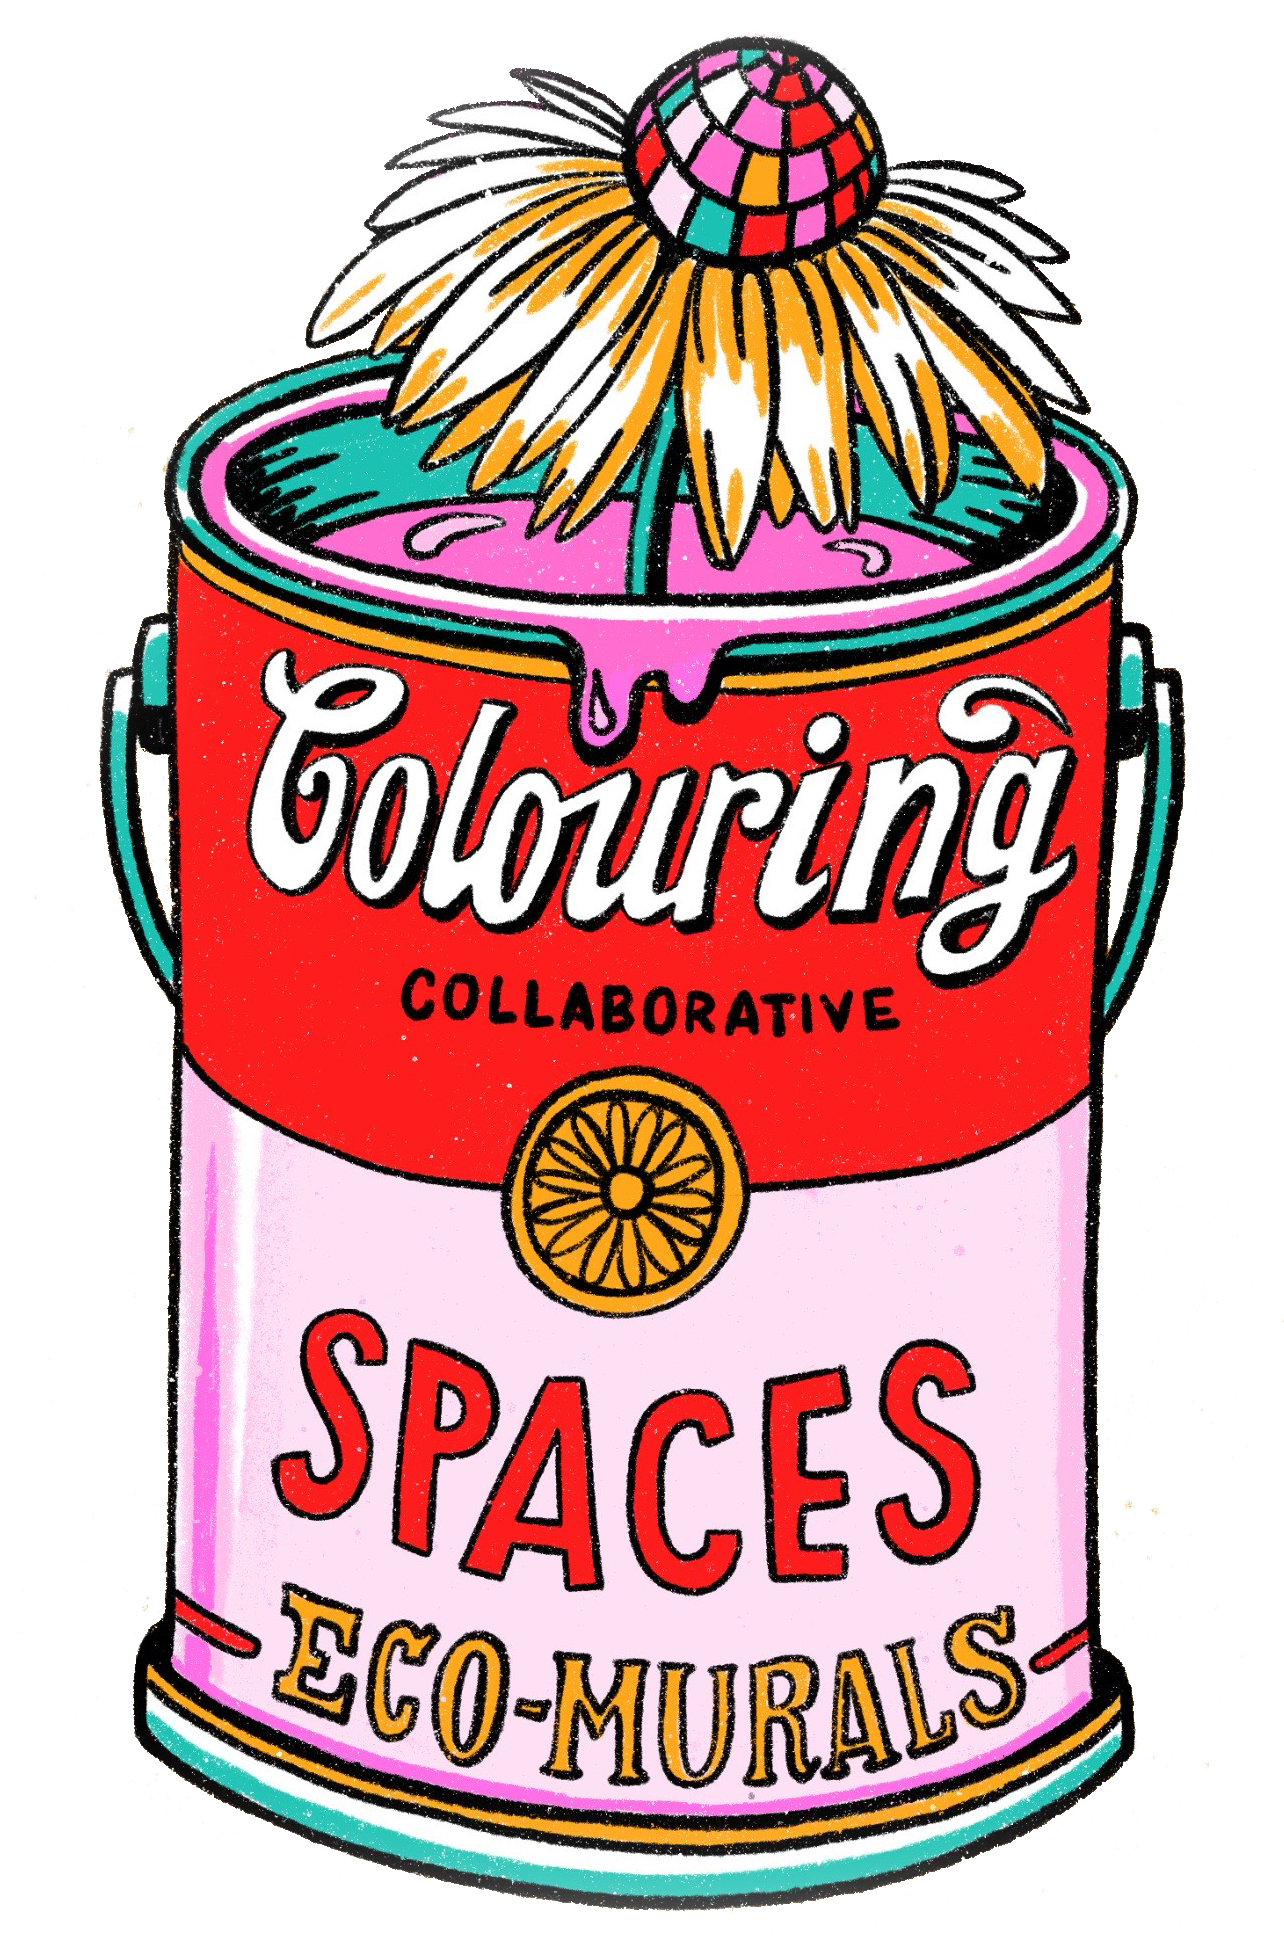 COLOURING SPACES